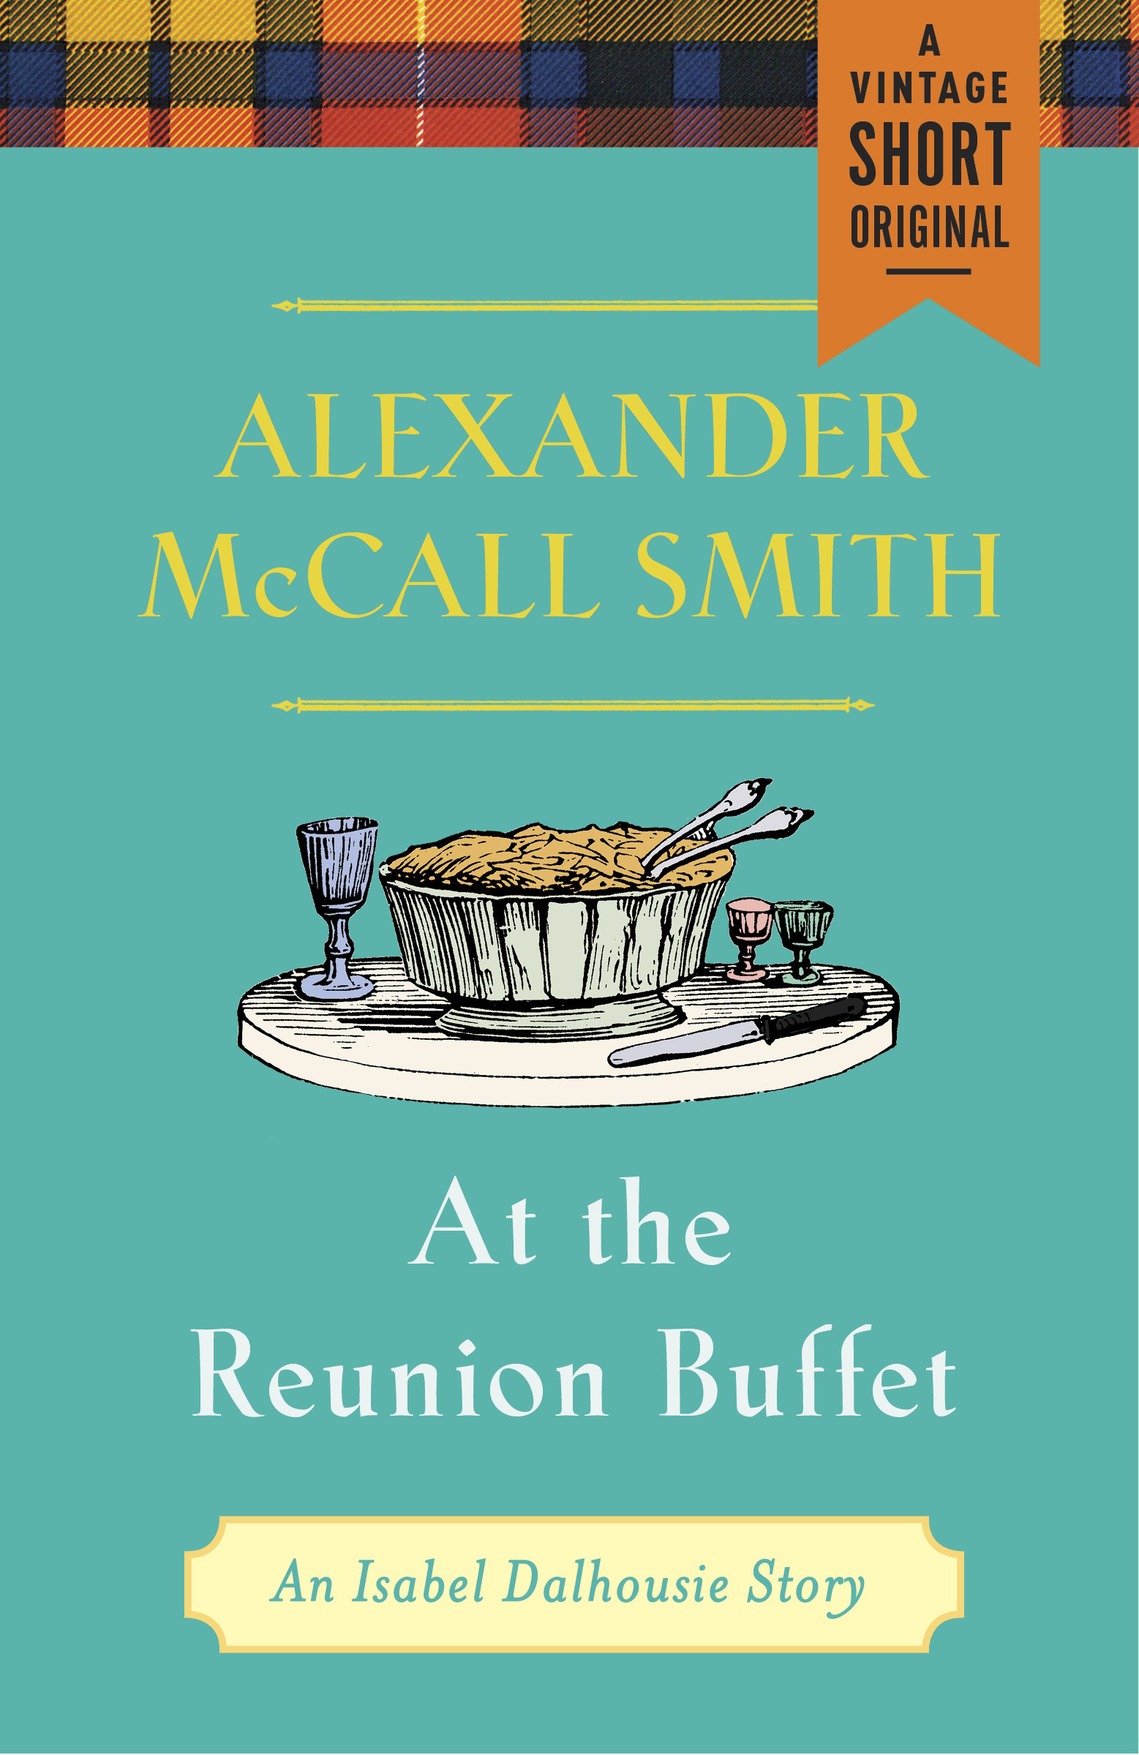 At the Reunion Buffet (2015) by Alexander McCall Smith